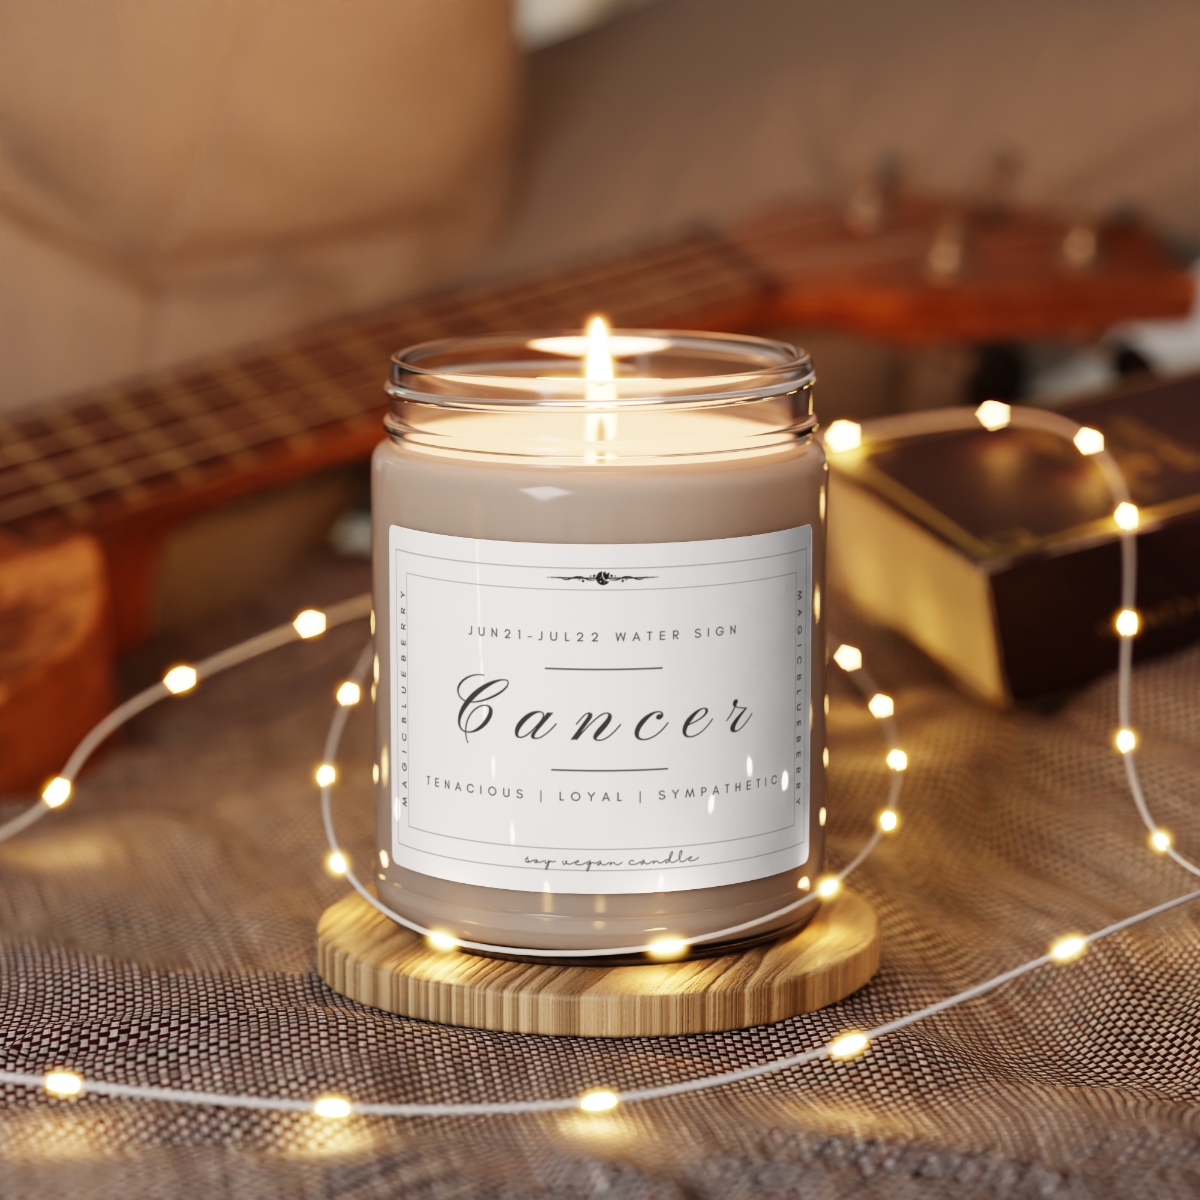 Cancer - Scented Vegan Soy Wax Candle Clear Jar Candle, Spell Candle, Sassy Candle Vegan Candle Cotton Wick Candle Home Deco product main image